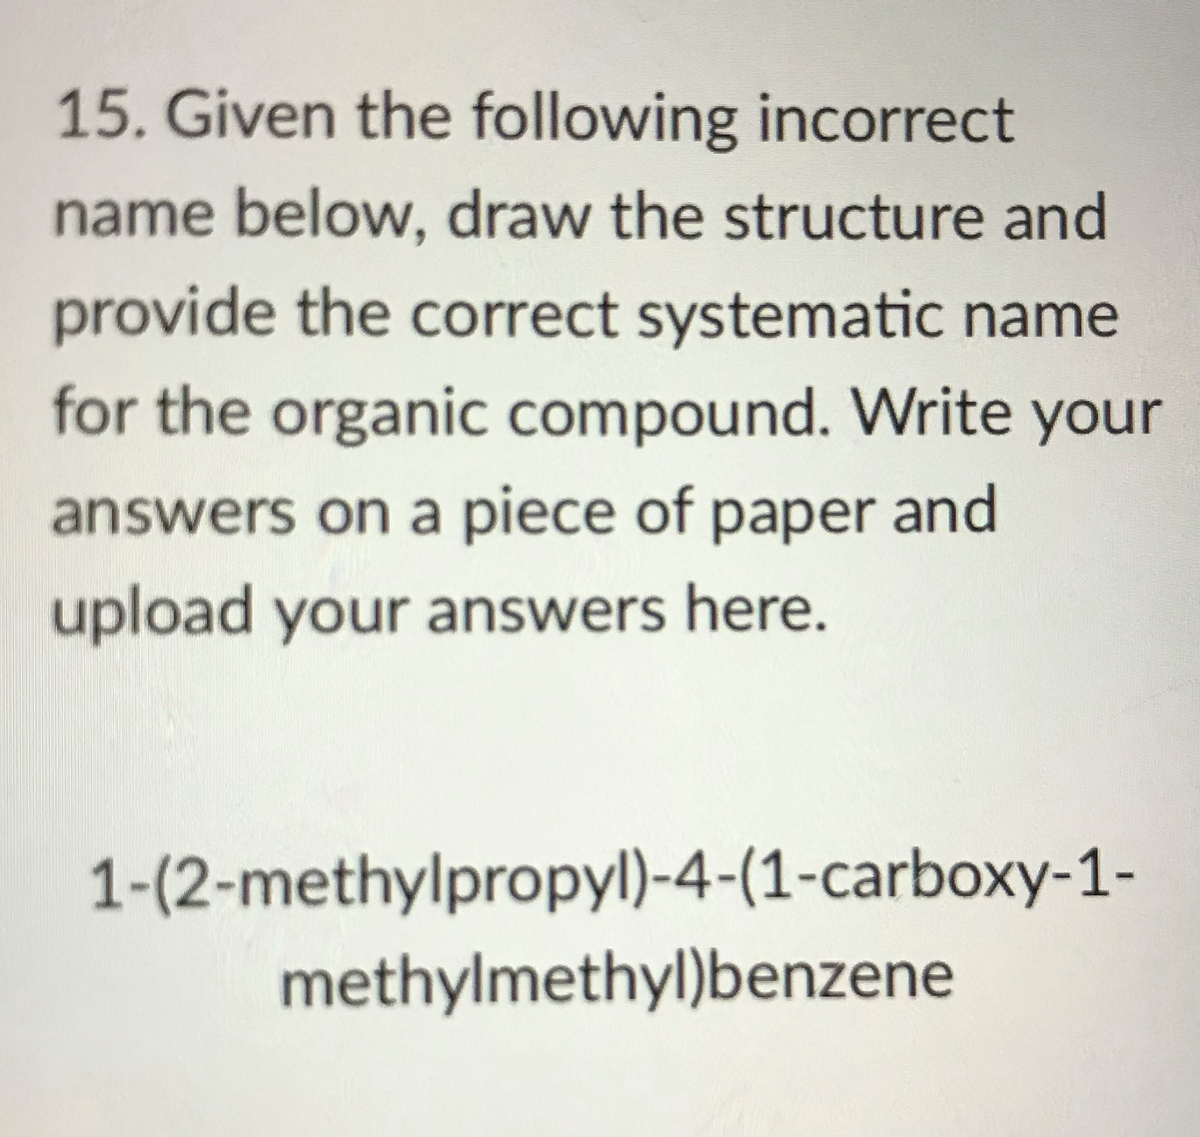 15. Given the following incorrect
name below, draw the structure and
provide the correct systematic name
for the organic compound. Write your
answers on a piece of paper and
upload your answers here.
1-(2-methylpropyl)-4-(1-carboxy-1-
methylmethyl)benzene
